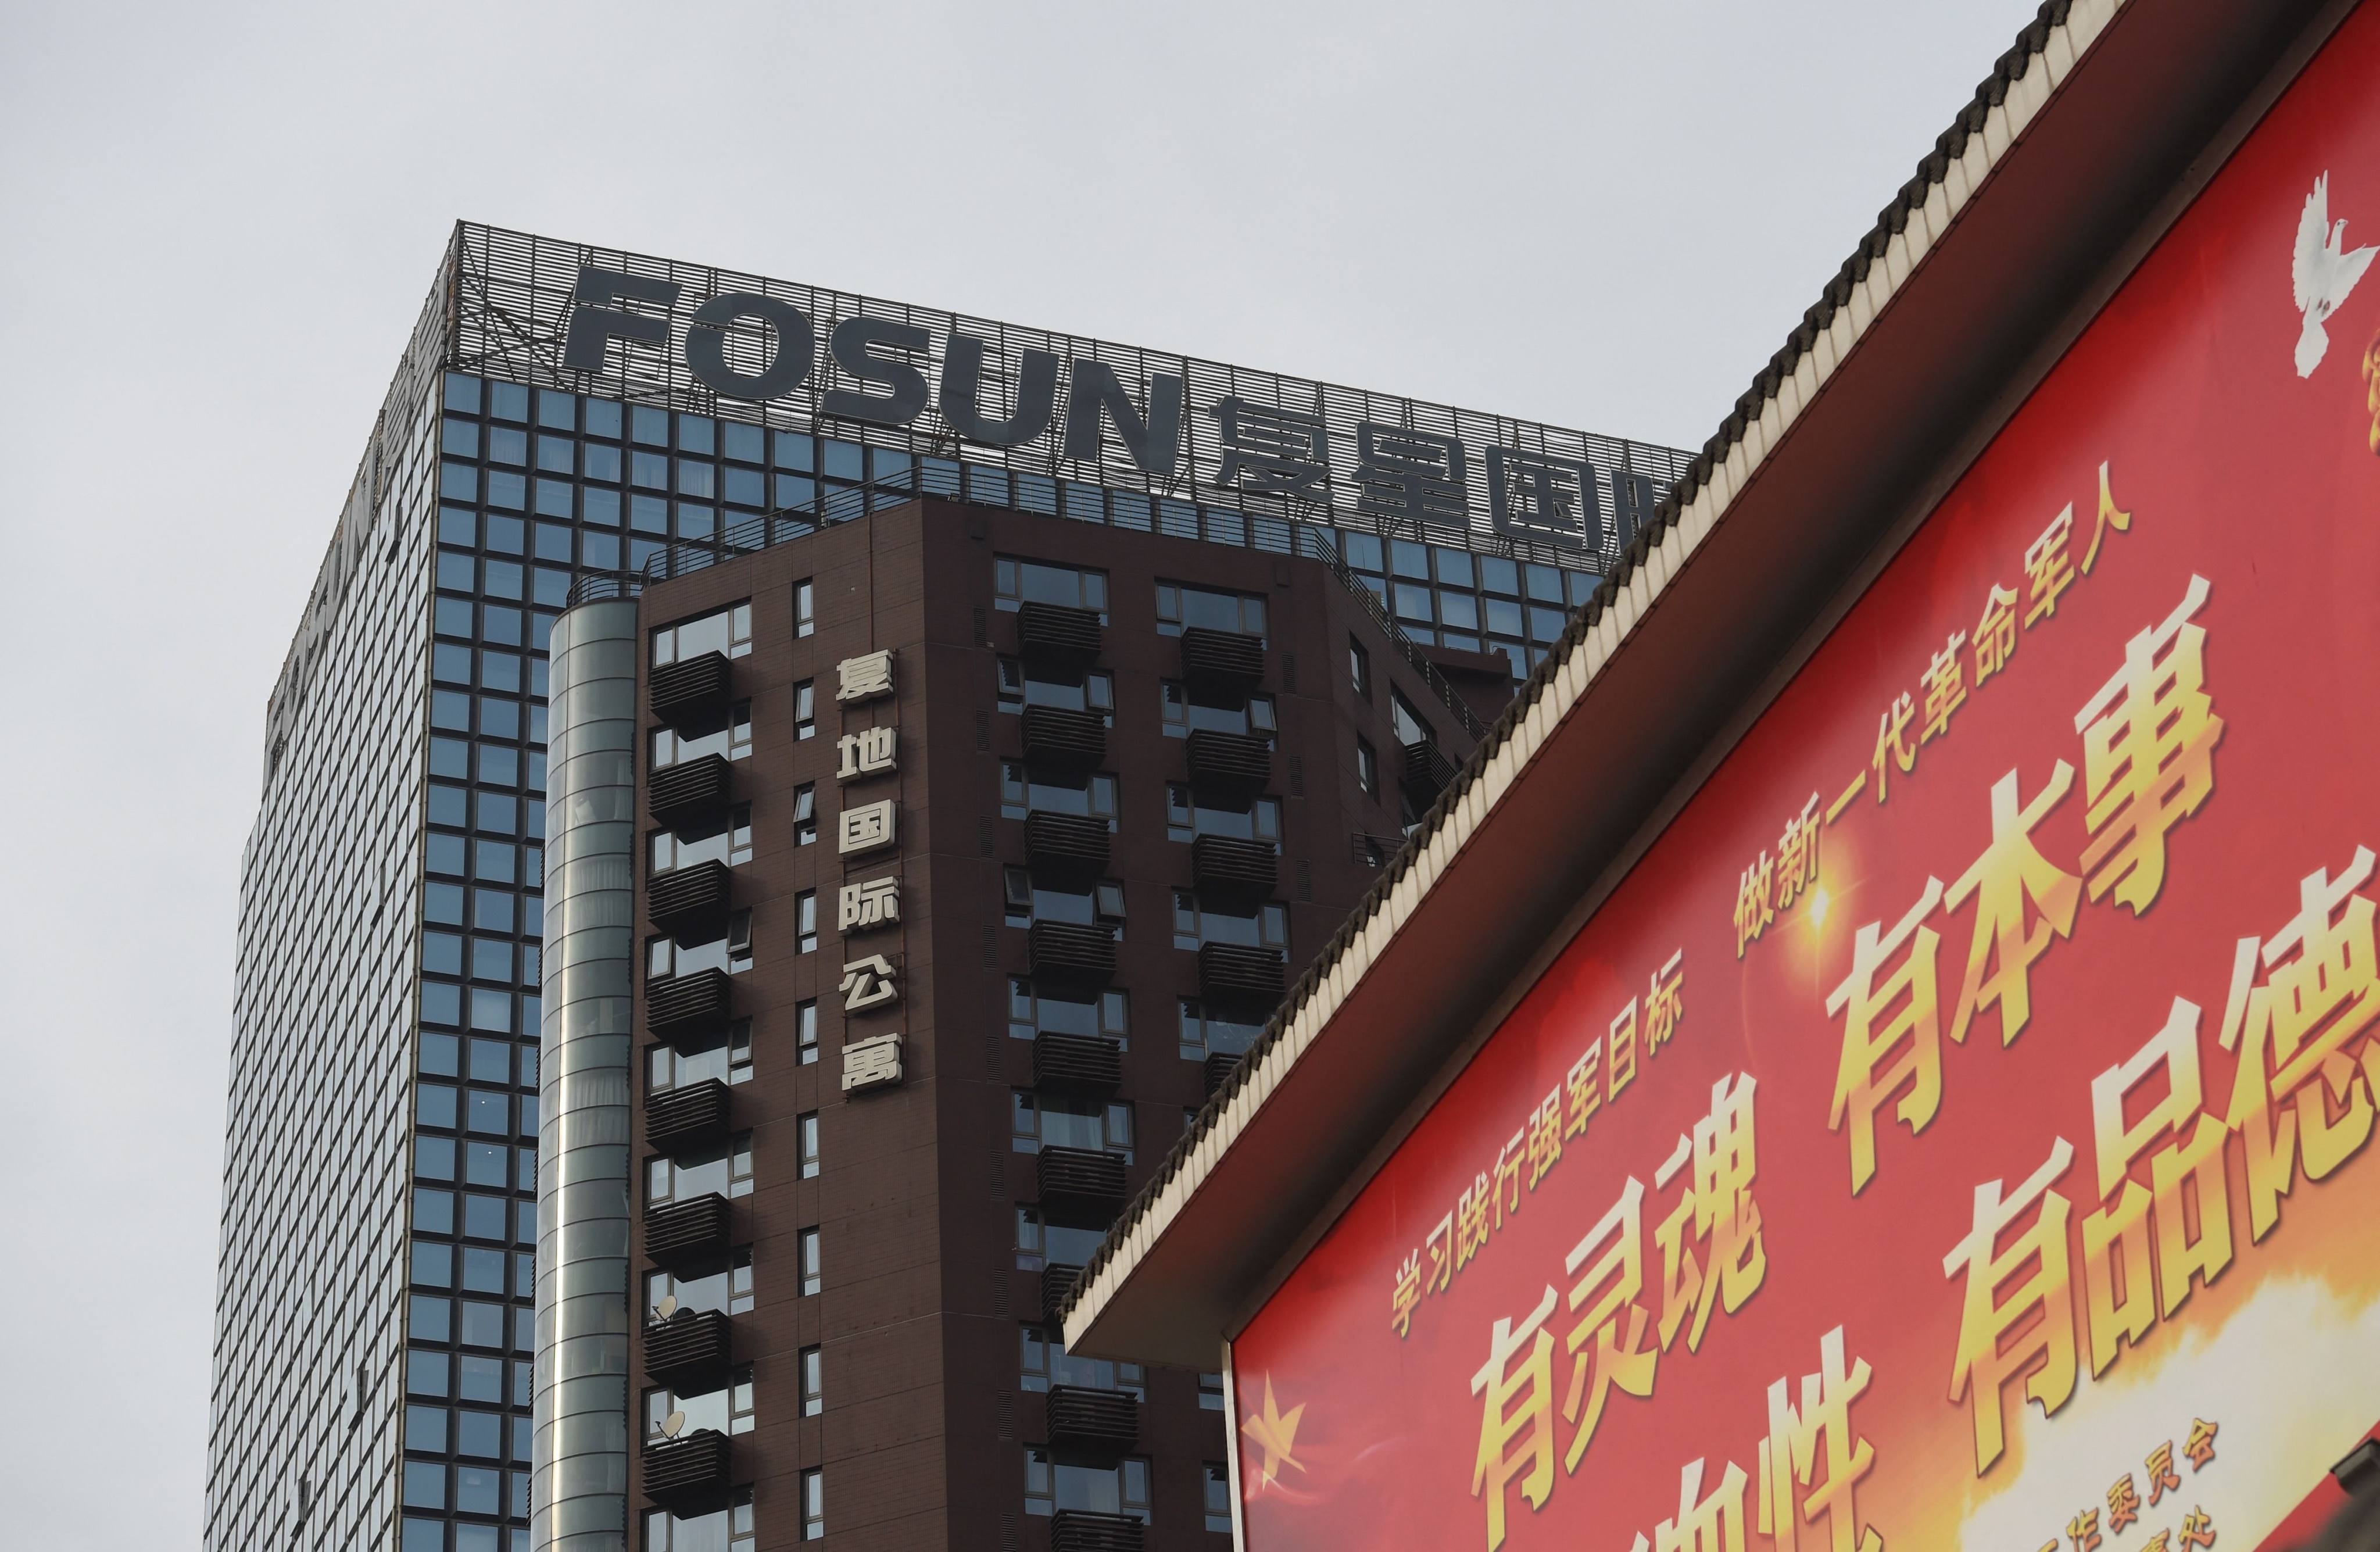 The logo of Chinese conglomerate Fosun seen on top of a building in Beijing. Photo: AFP